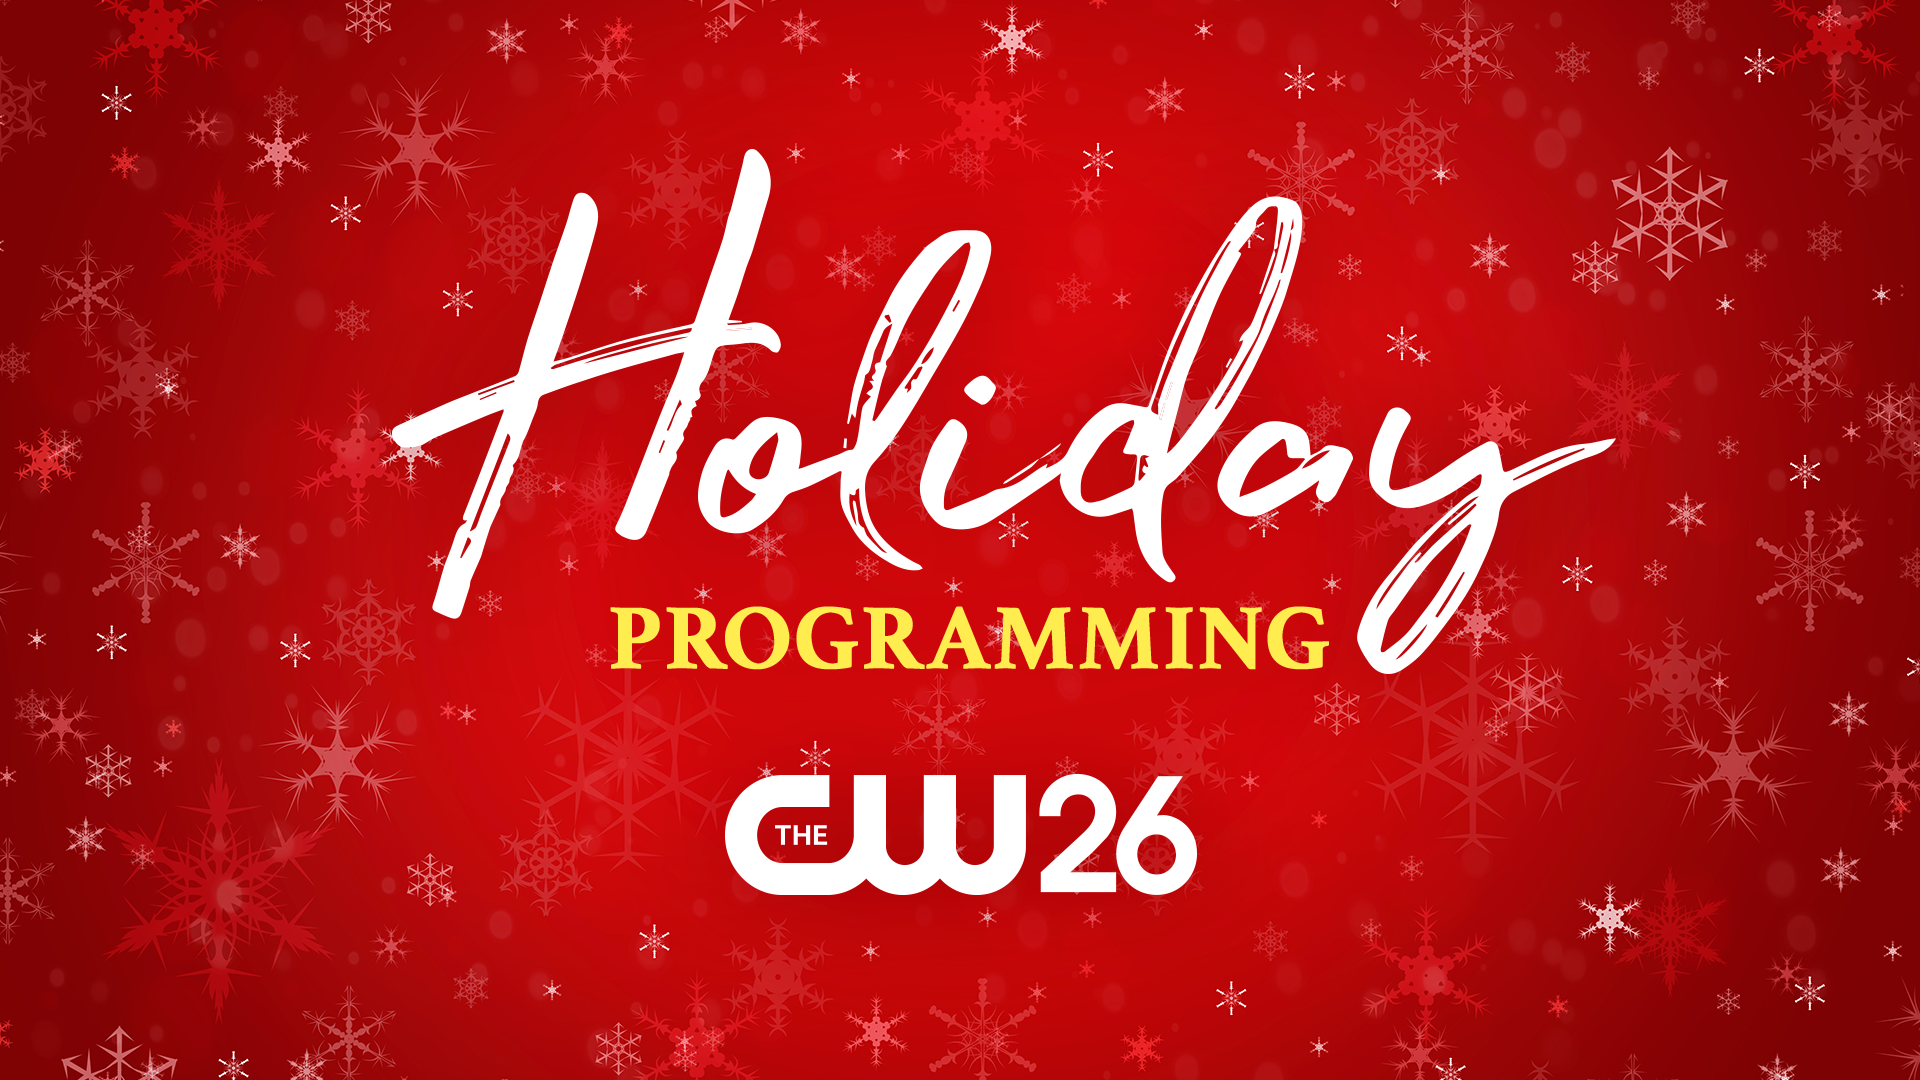 CW26 Tis' the season to be watching CW26's Holiday programming!